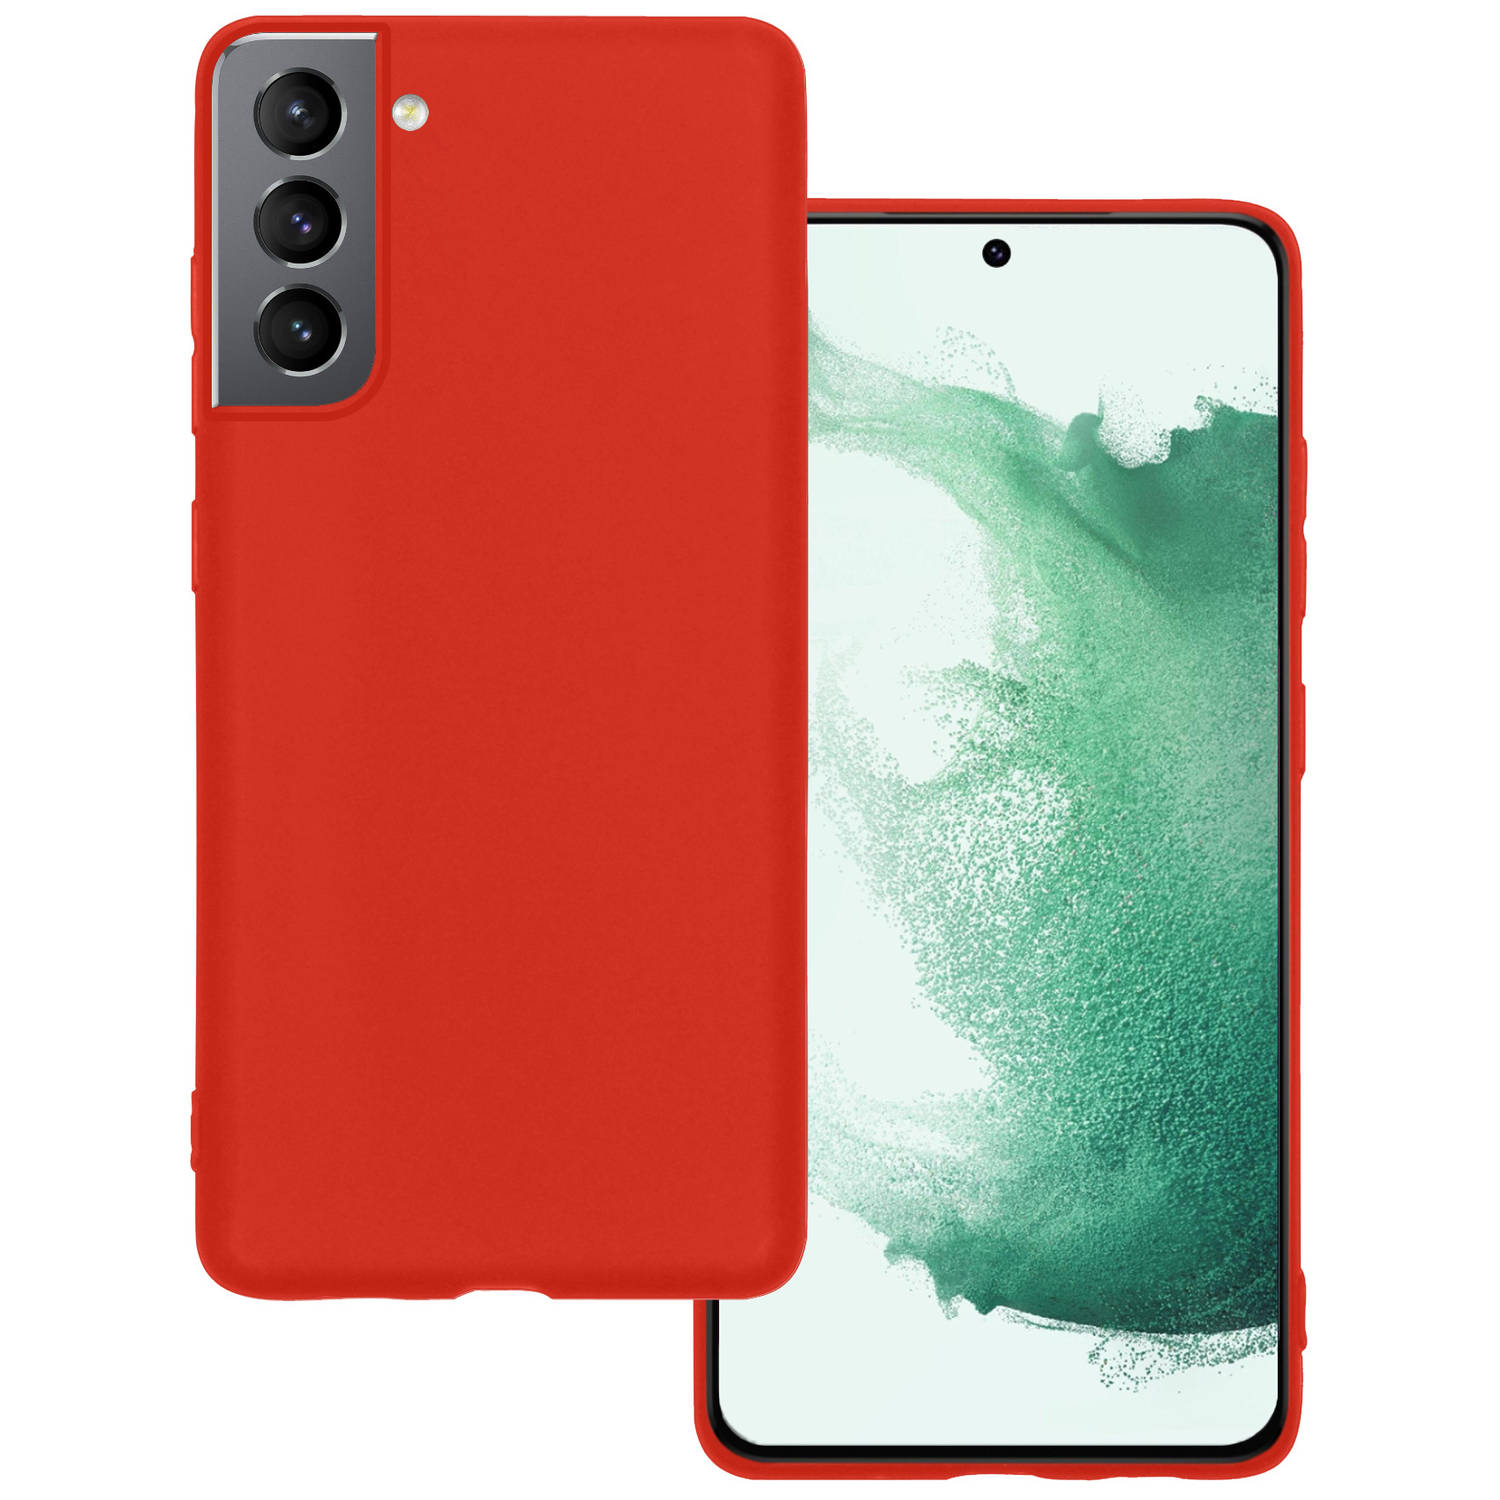 Basey Samsung Galaxy S22 Hoesje Siliconen Hoes Case Cover -Rood